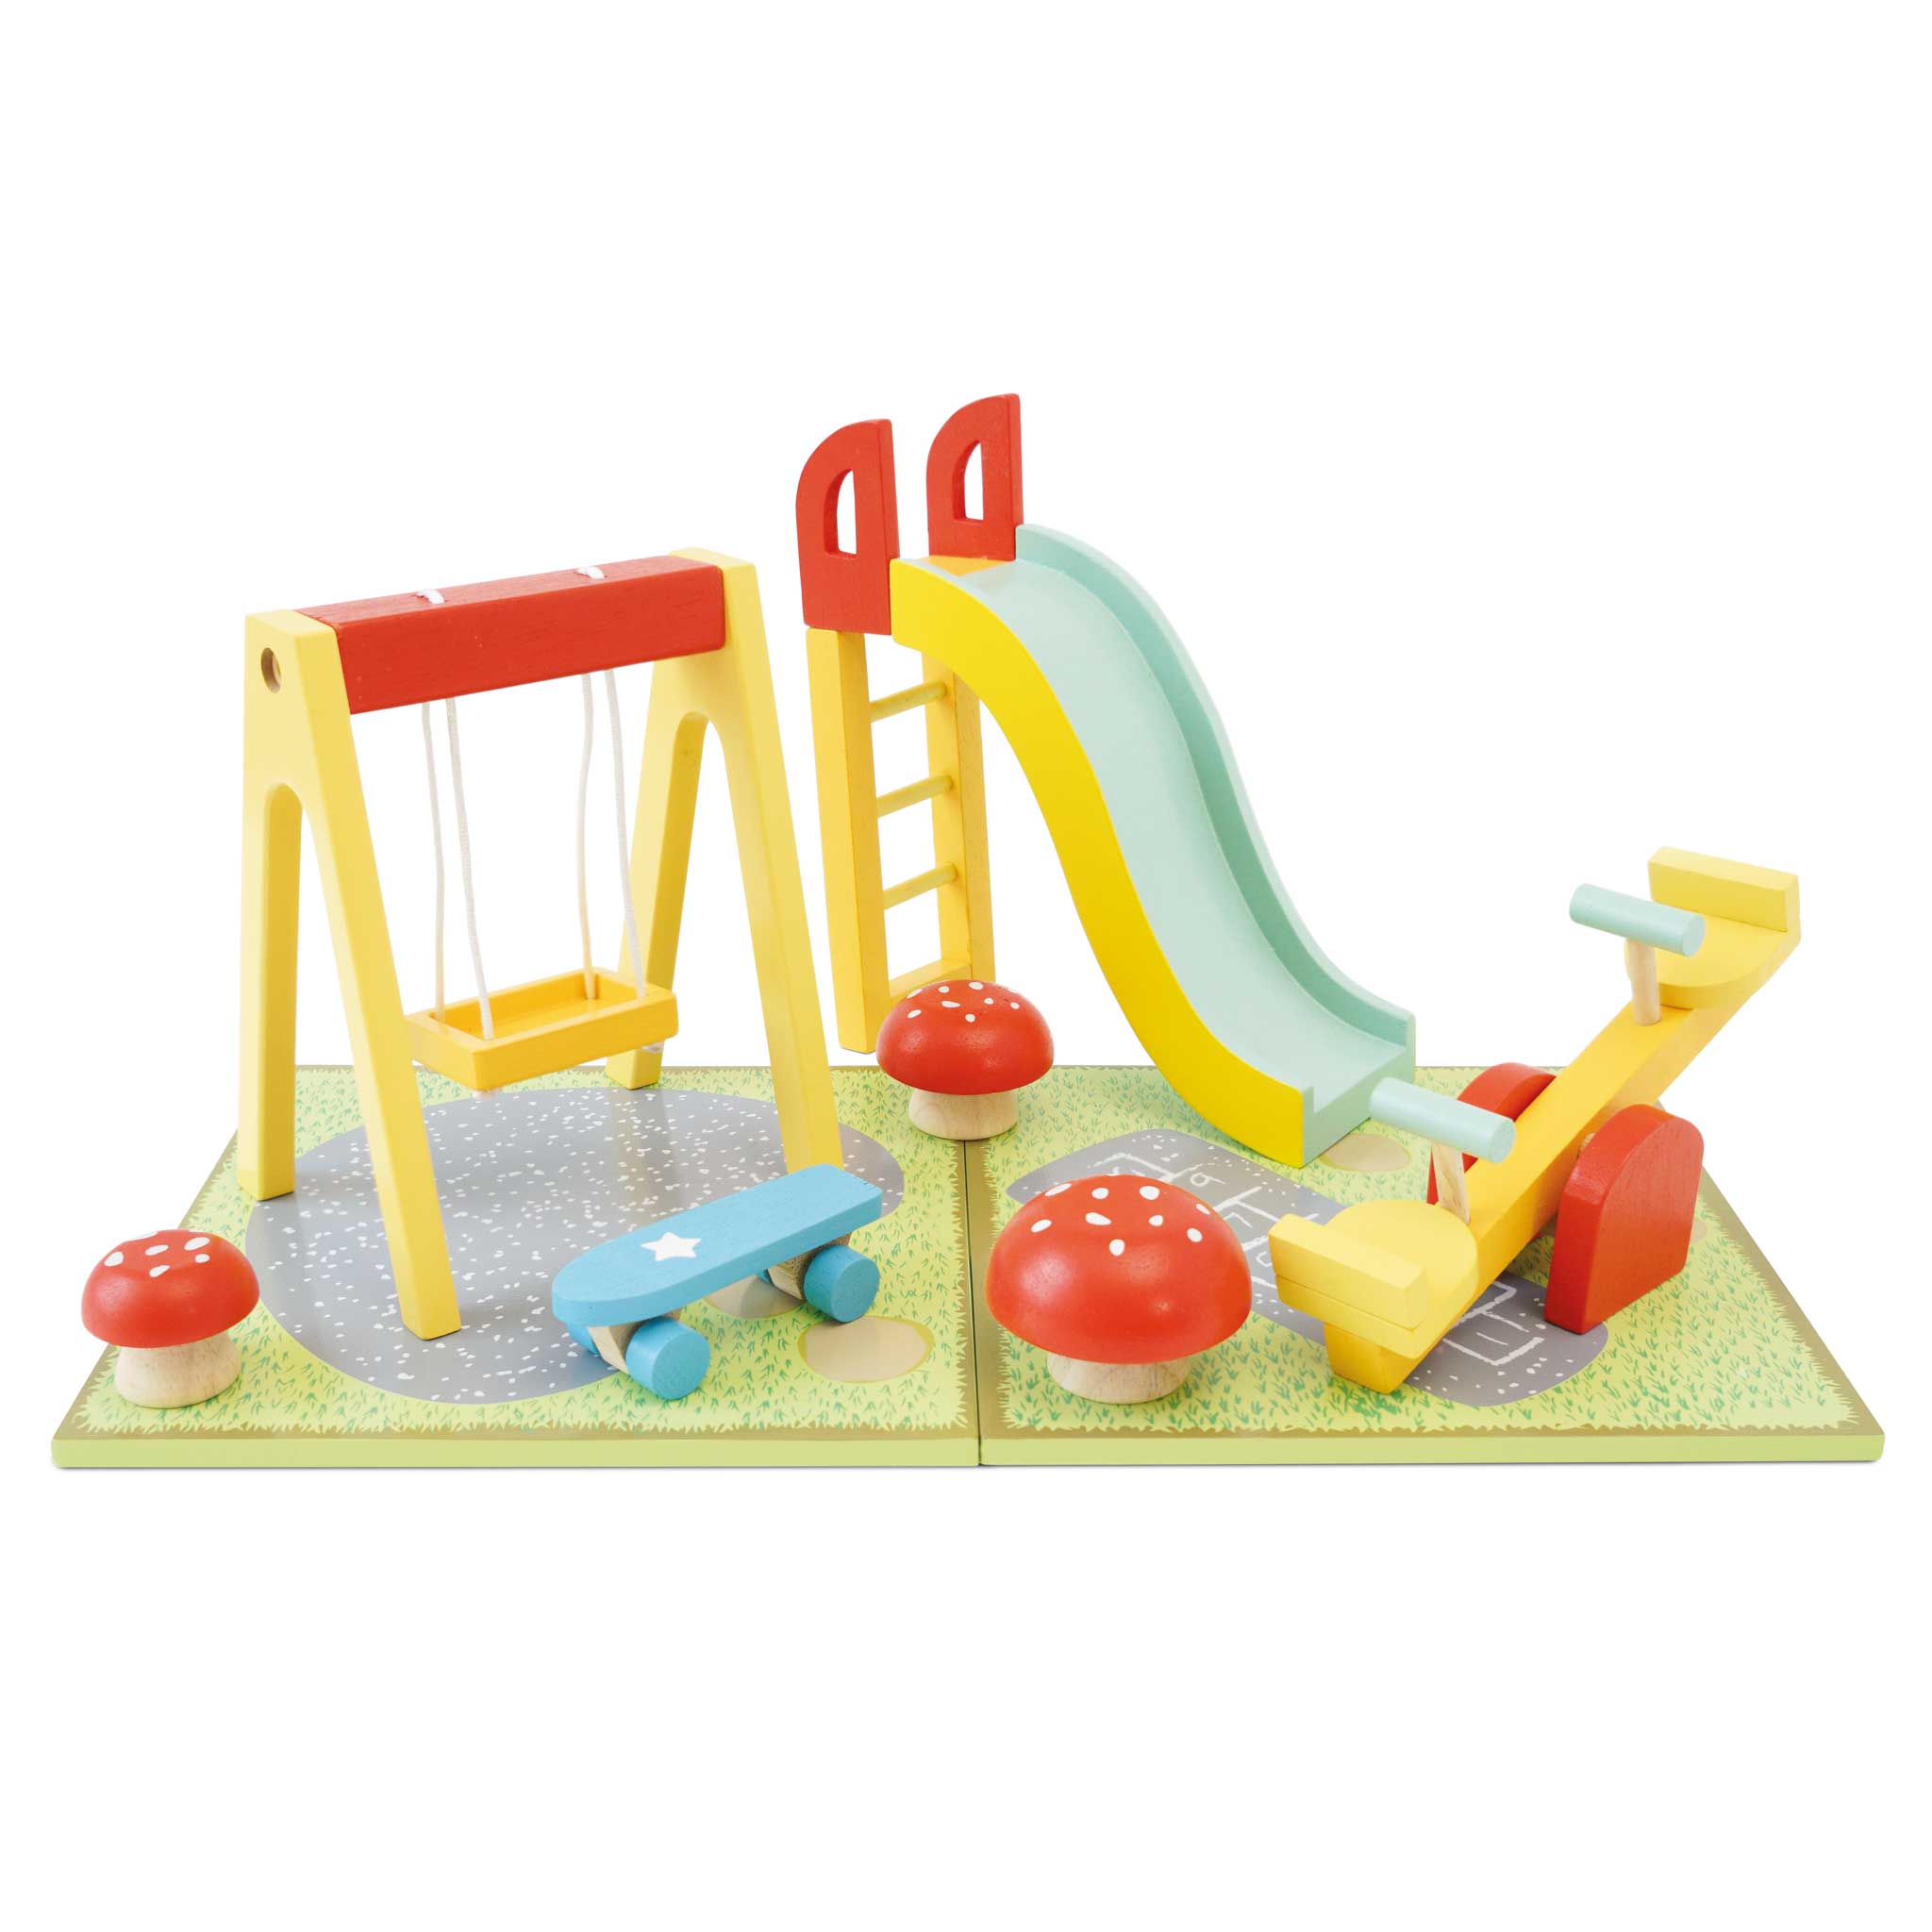 Dolls House Outdoor Furniture Play Set